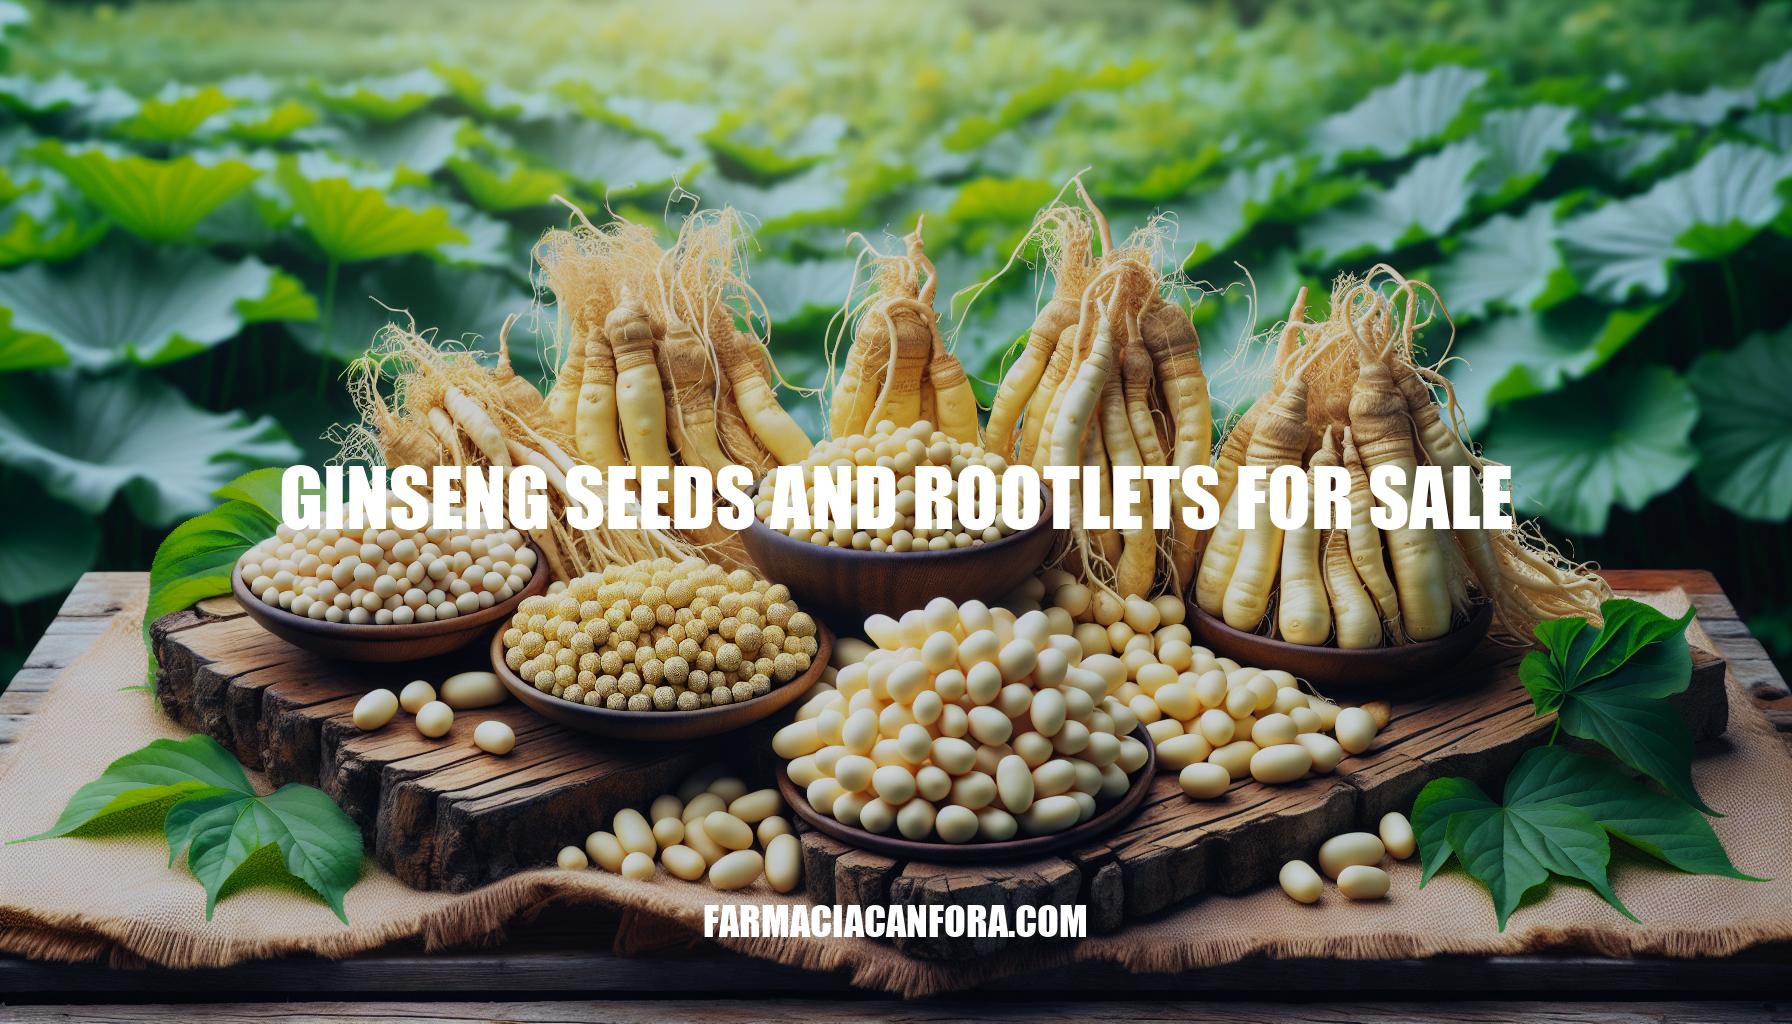 Buy Ginseng Seeds and Rootlets for Sale - Best Deals Online